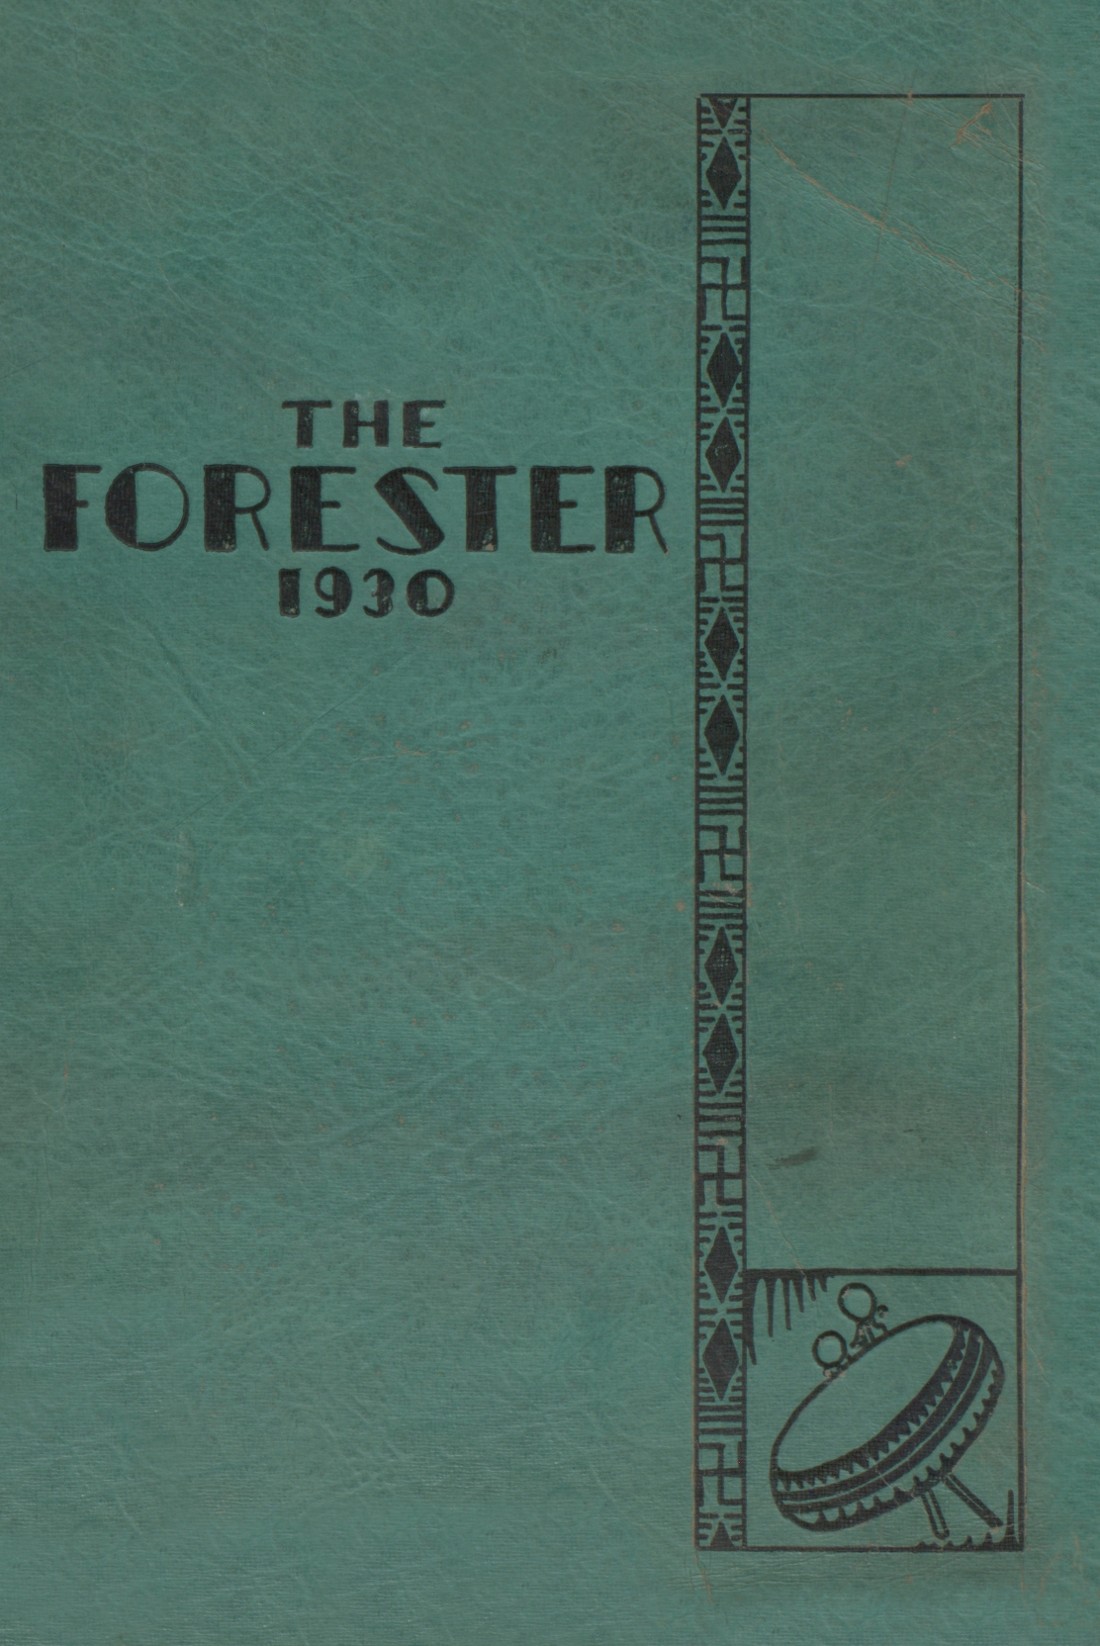 1930 yearbook from Forest Park High School 406 from Baltimore, Maryland